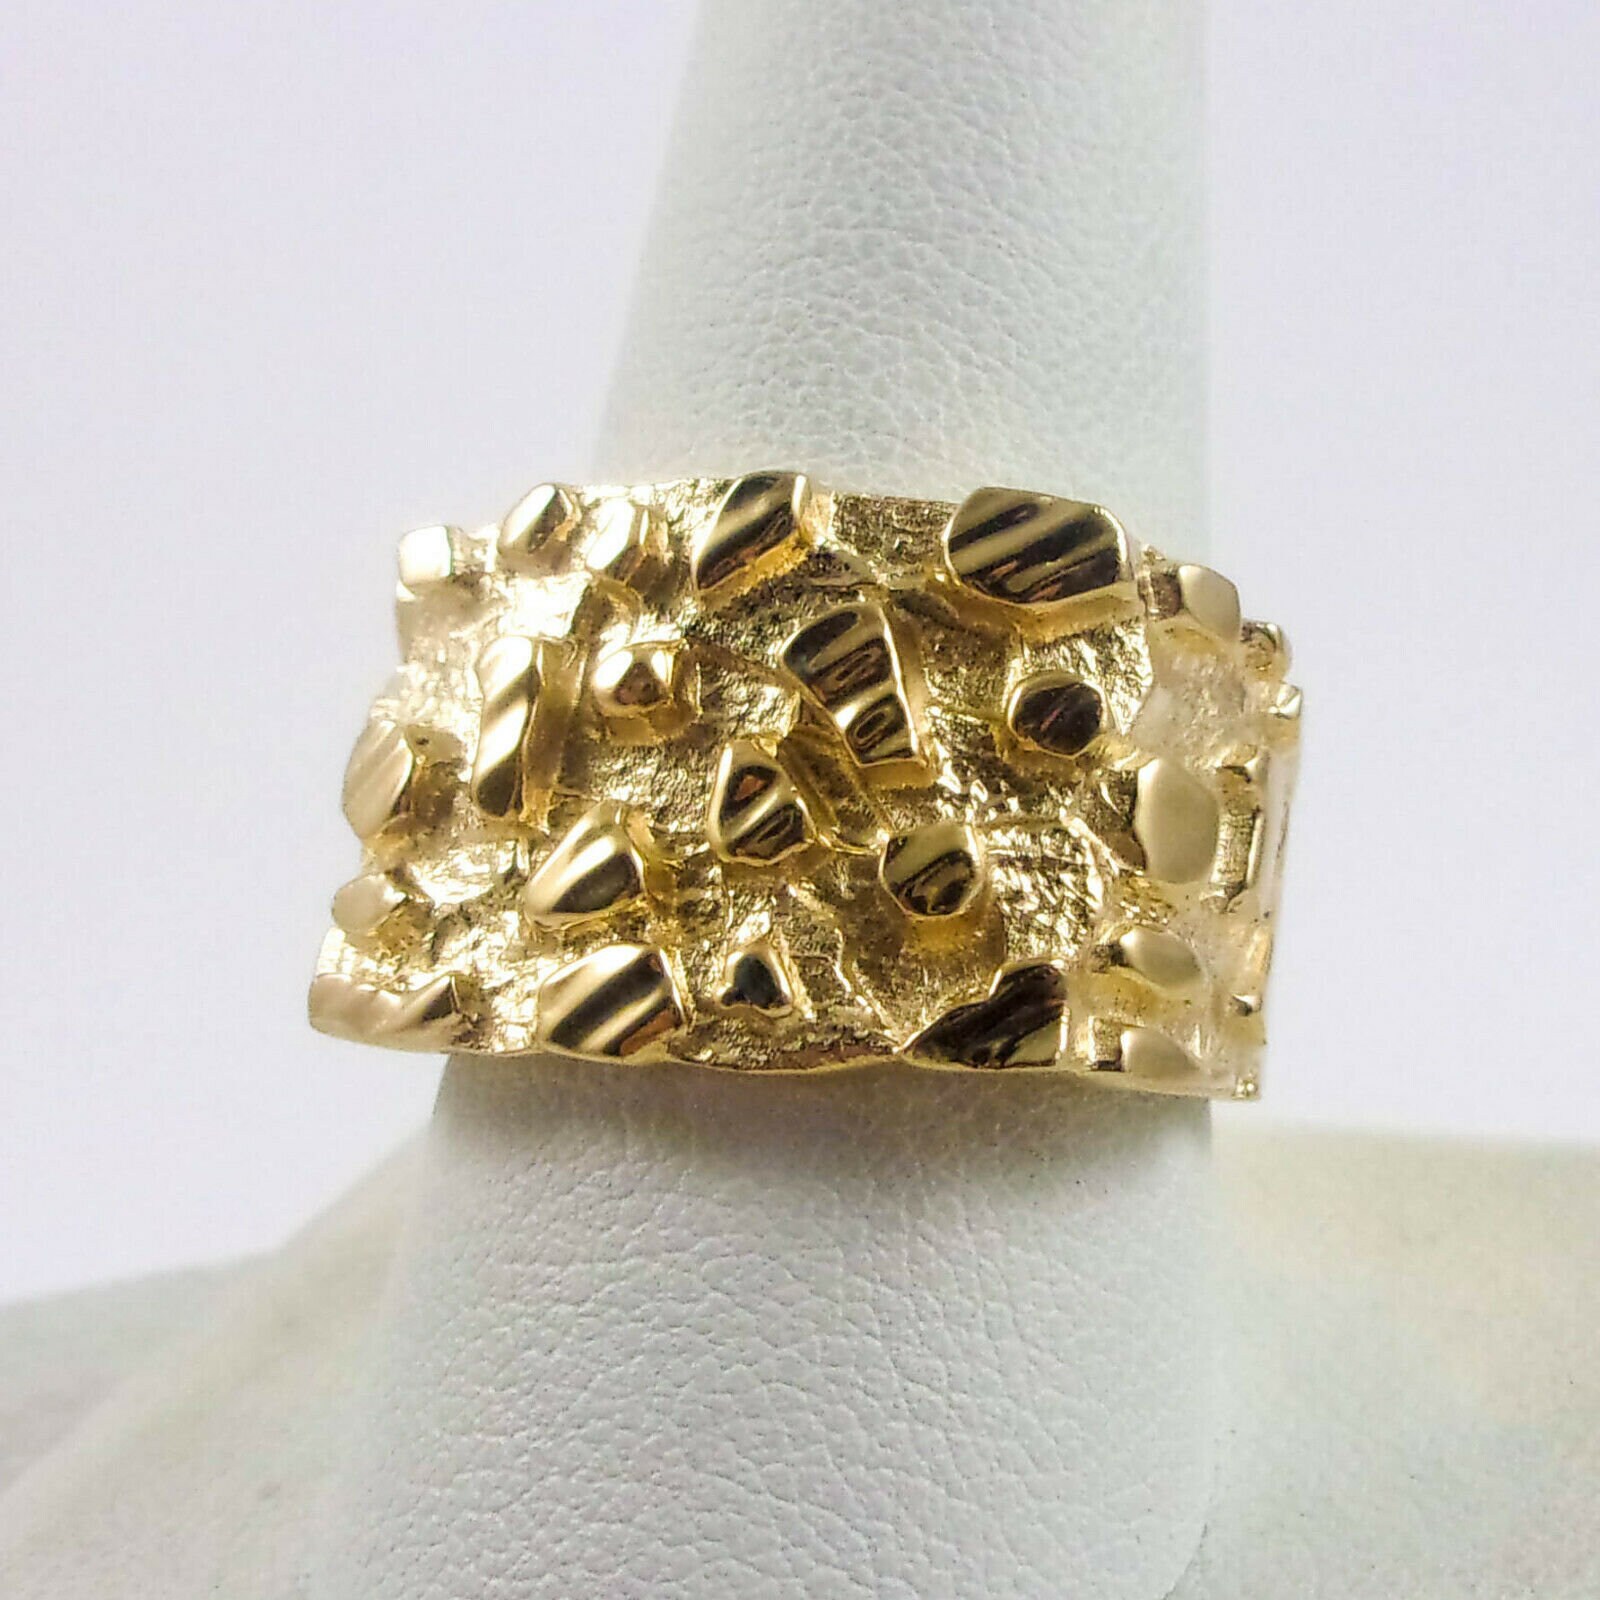 10k Yellow Gold Authentic Nugget Ring Diamond Cut Sizes 6-13